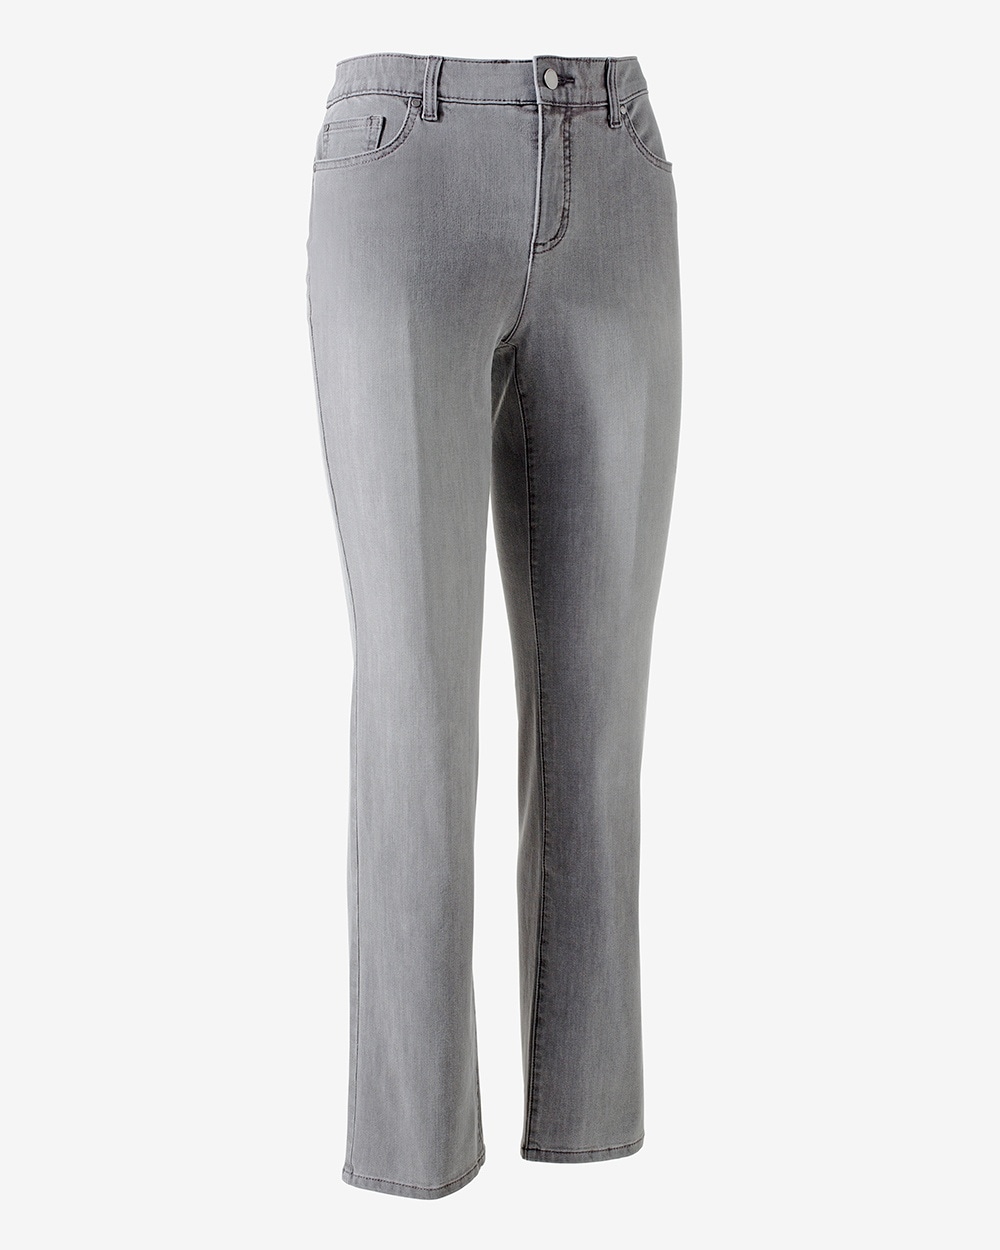 Fabulously Slimming 4-Way Stretch Jeans